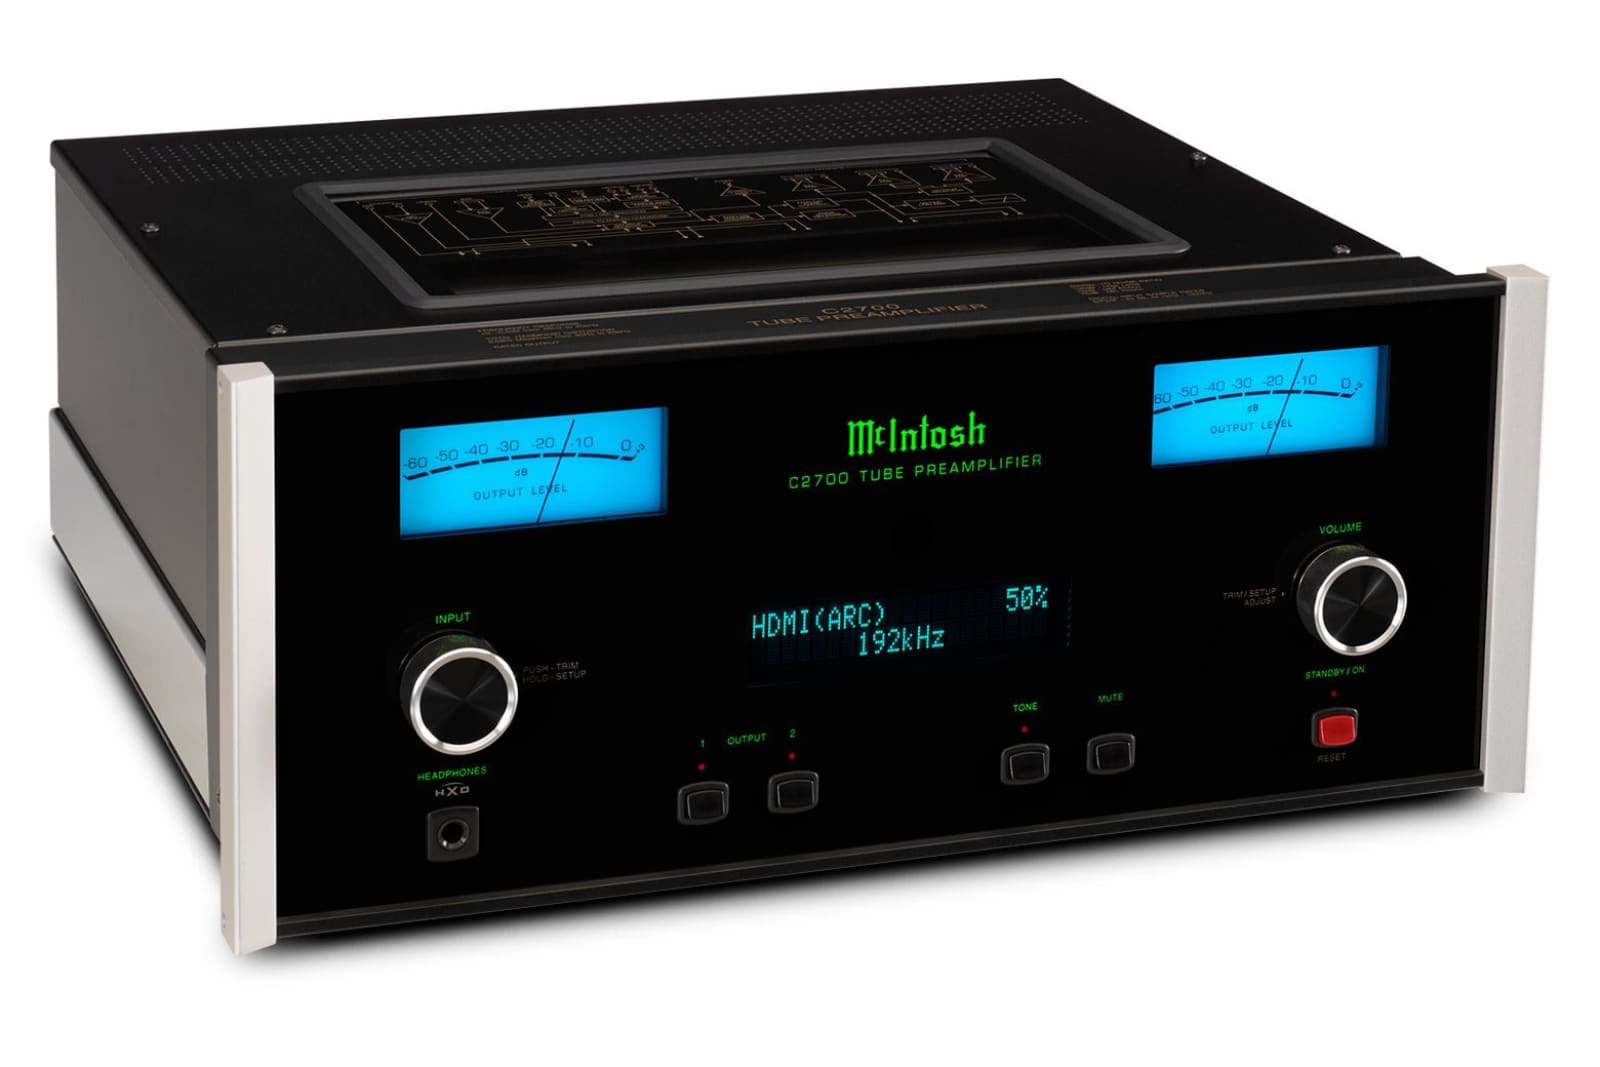 Mcintosh C2700 Tube Preamplifier And Dac